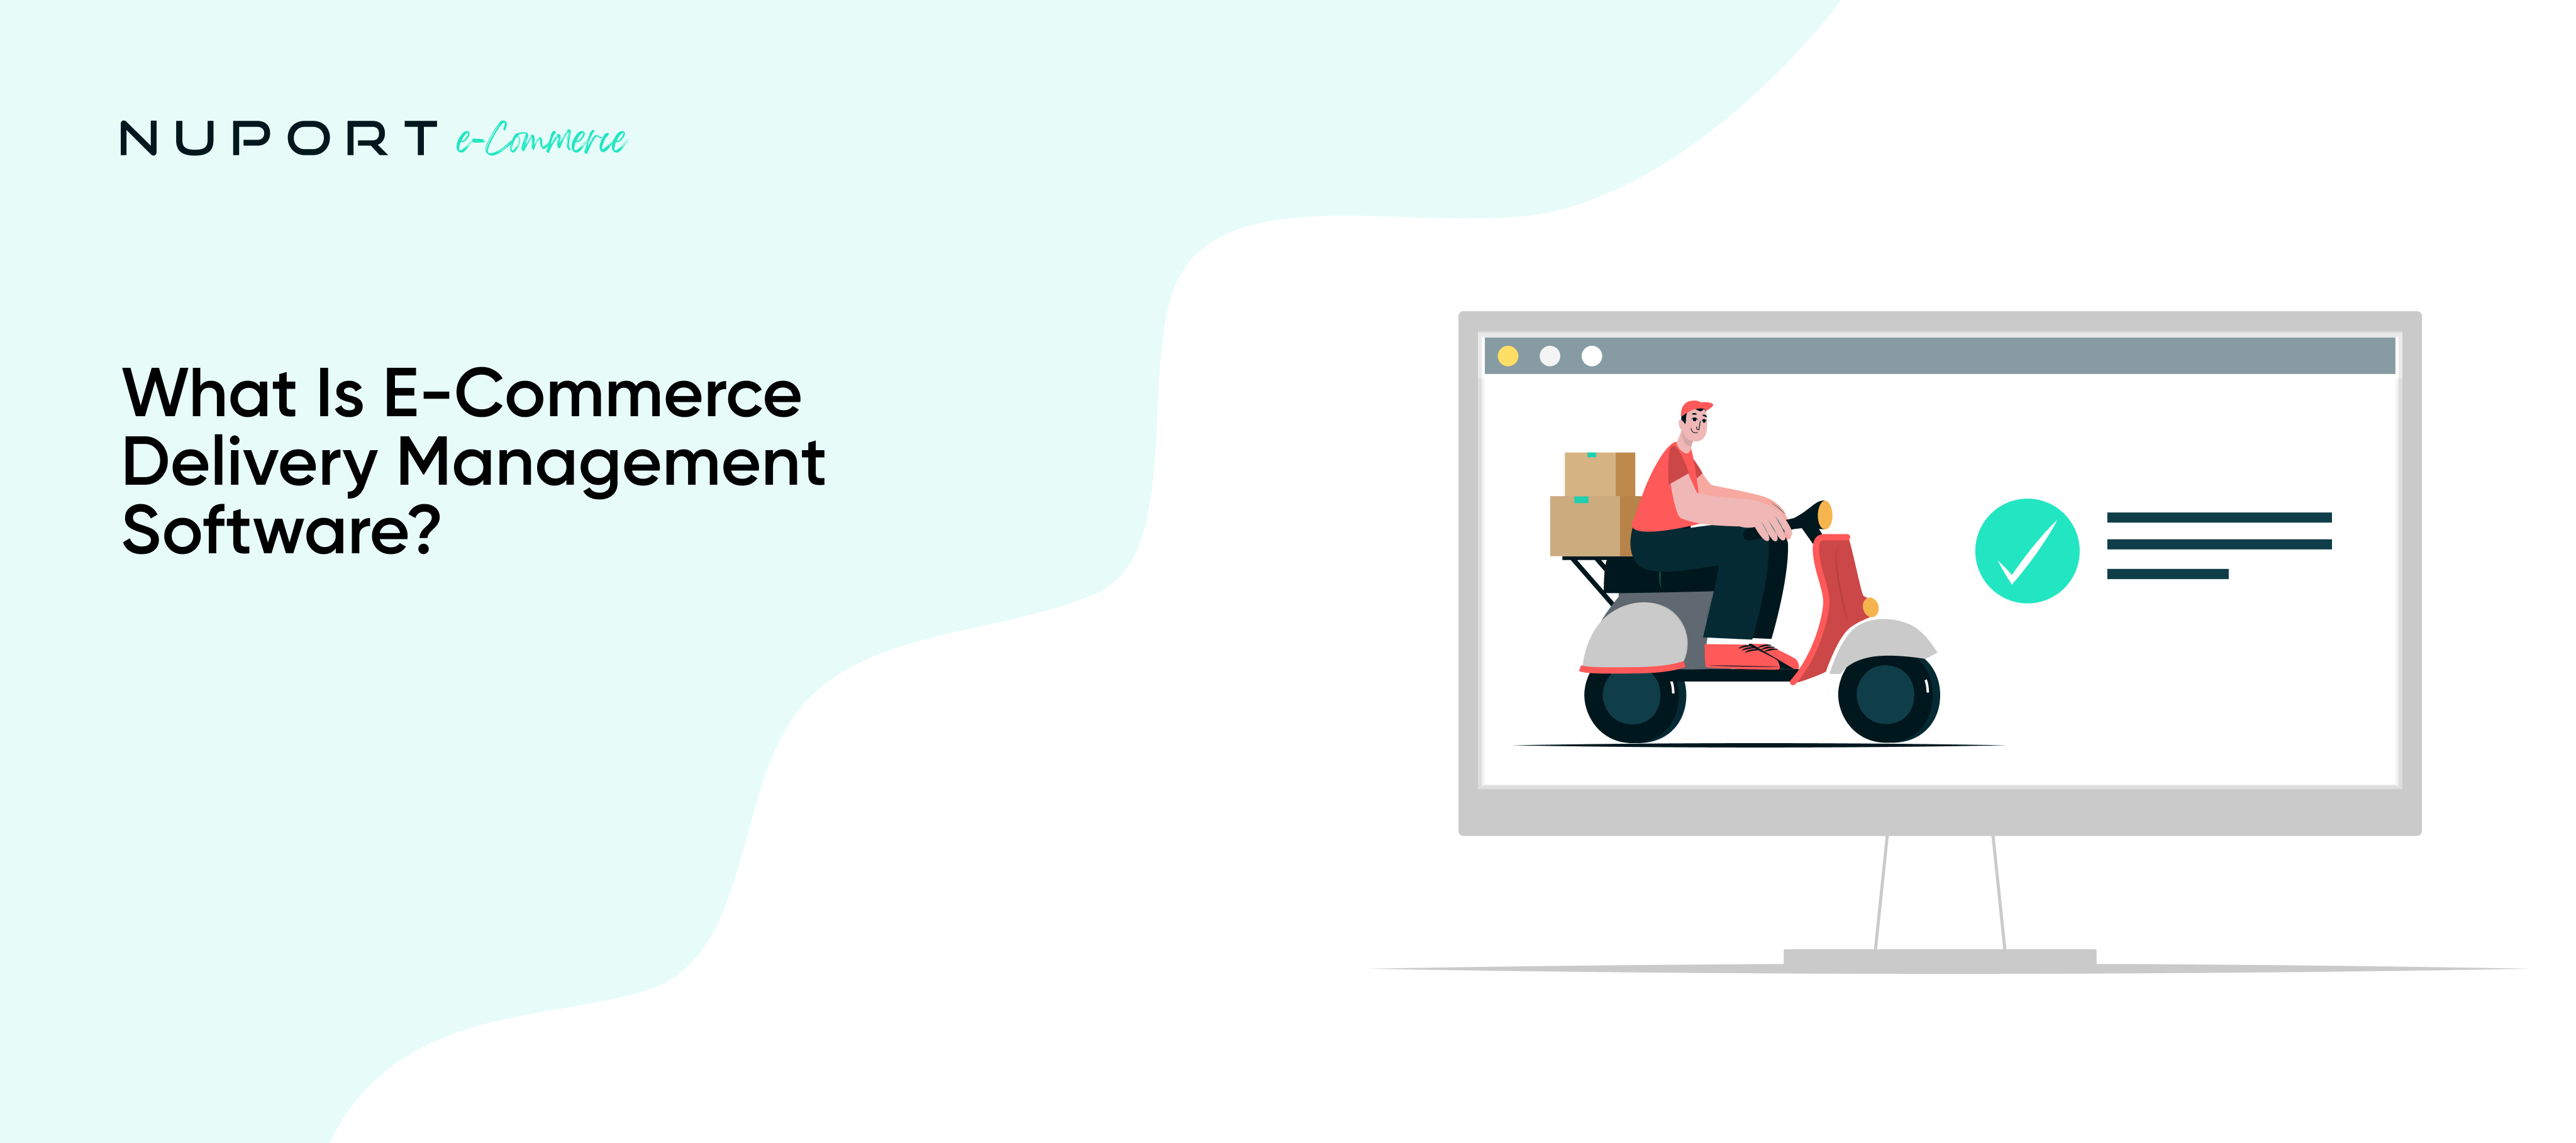 What is E-Commerce Delivery Management Software?